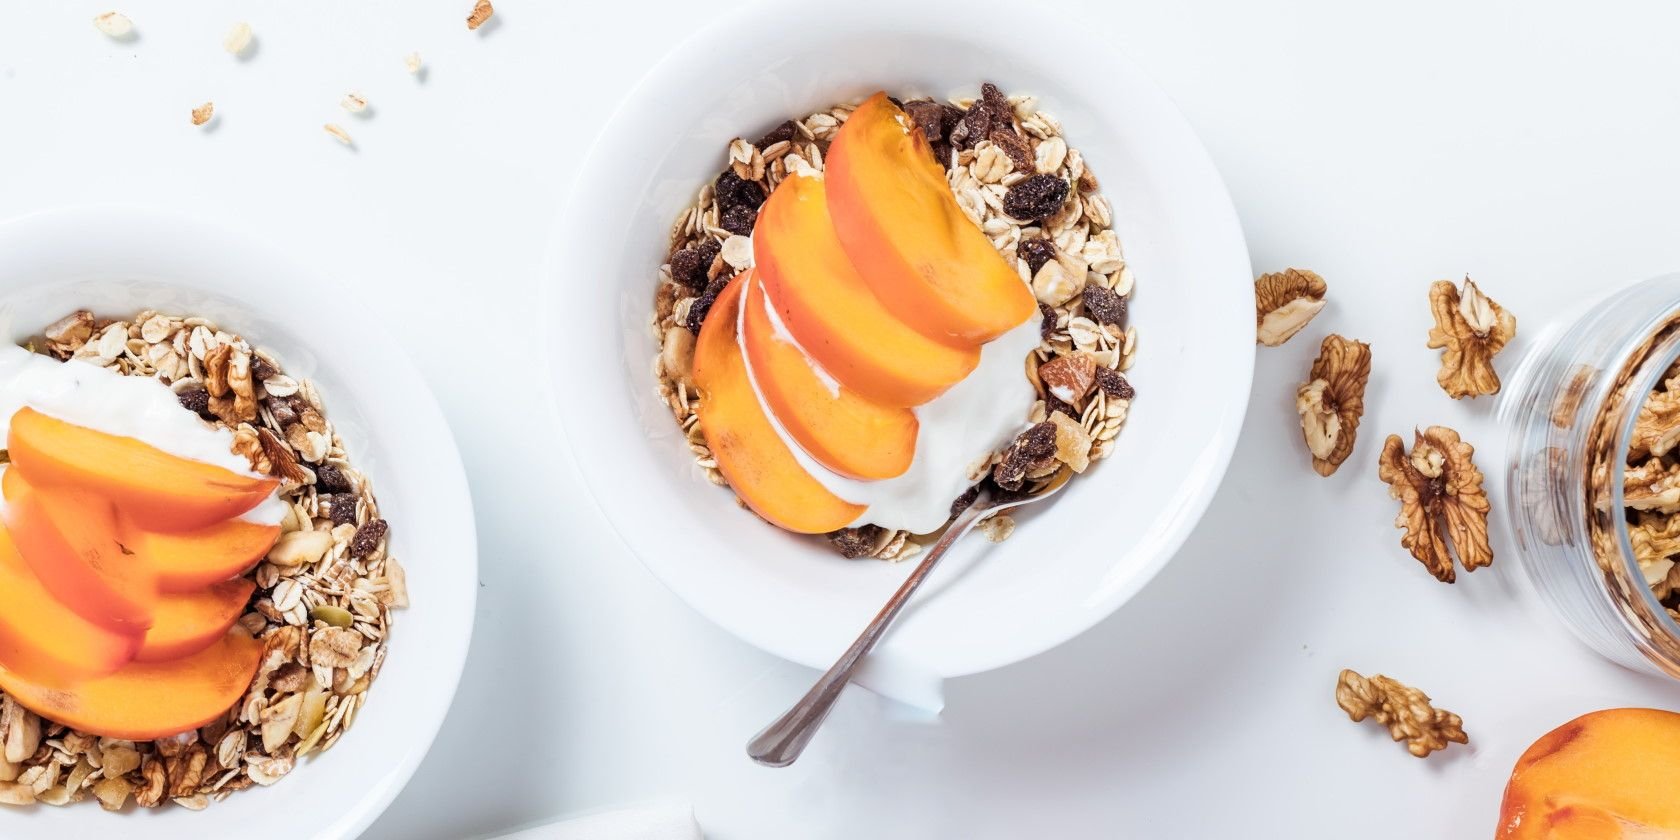 The 9 Best Mobile Apps to Find Healthy Breakfast Recipes